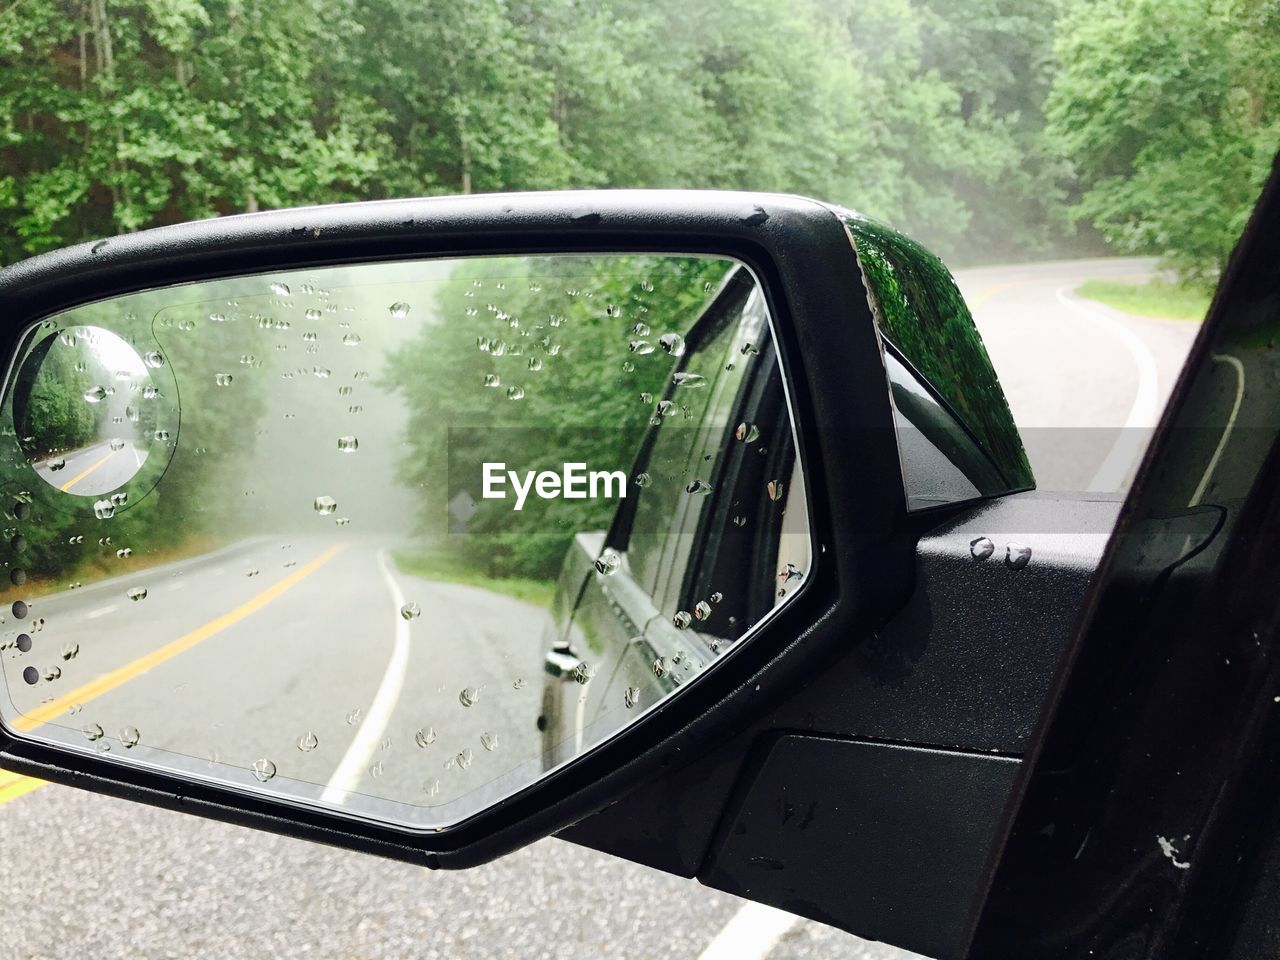 CLOSE-UP OF CAR ON SIDE-VIEW MIRROR